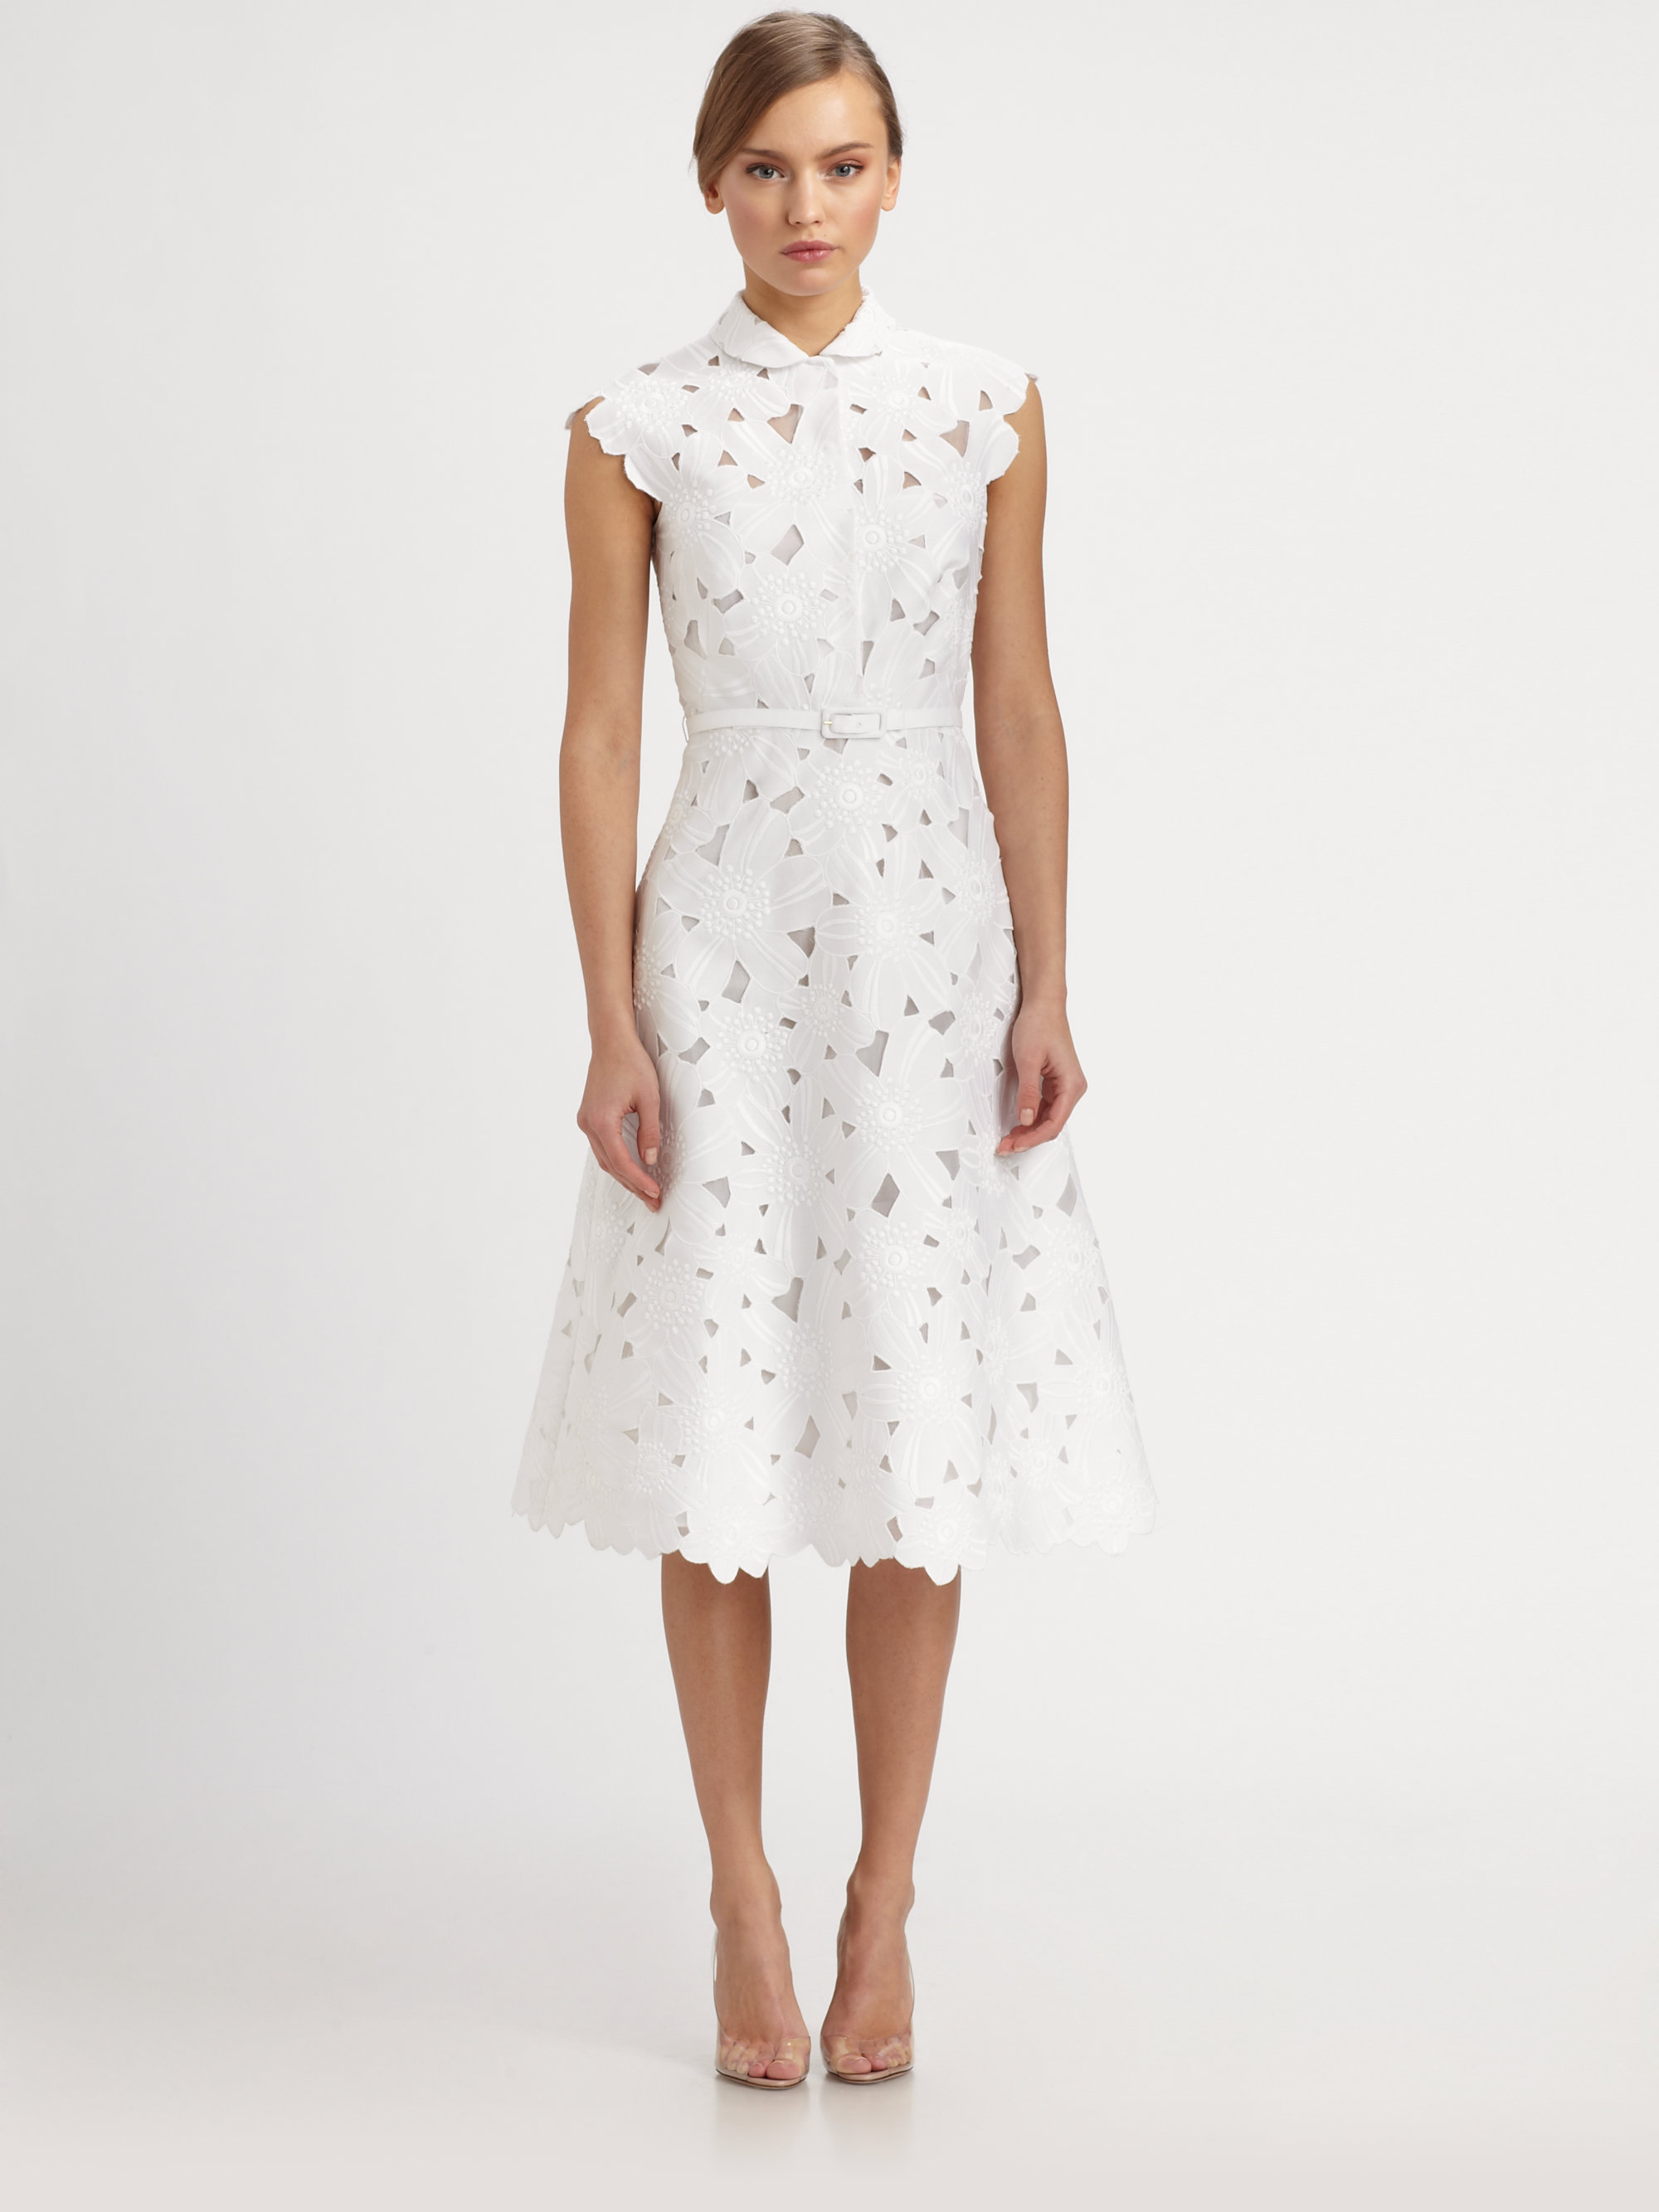 Flyvningen Lånte tackle Valentino Daisy Piqueacute Embroidered Dress in White | Lyst